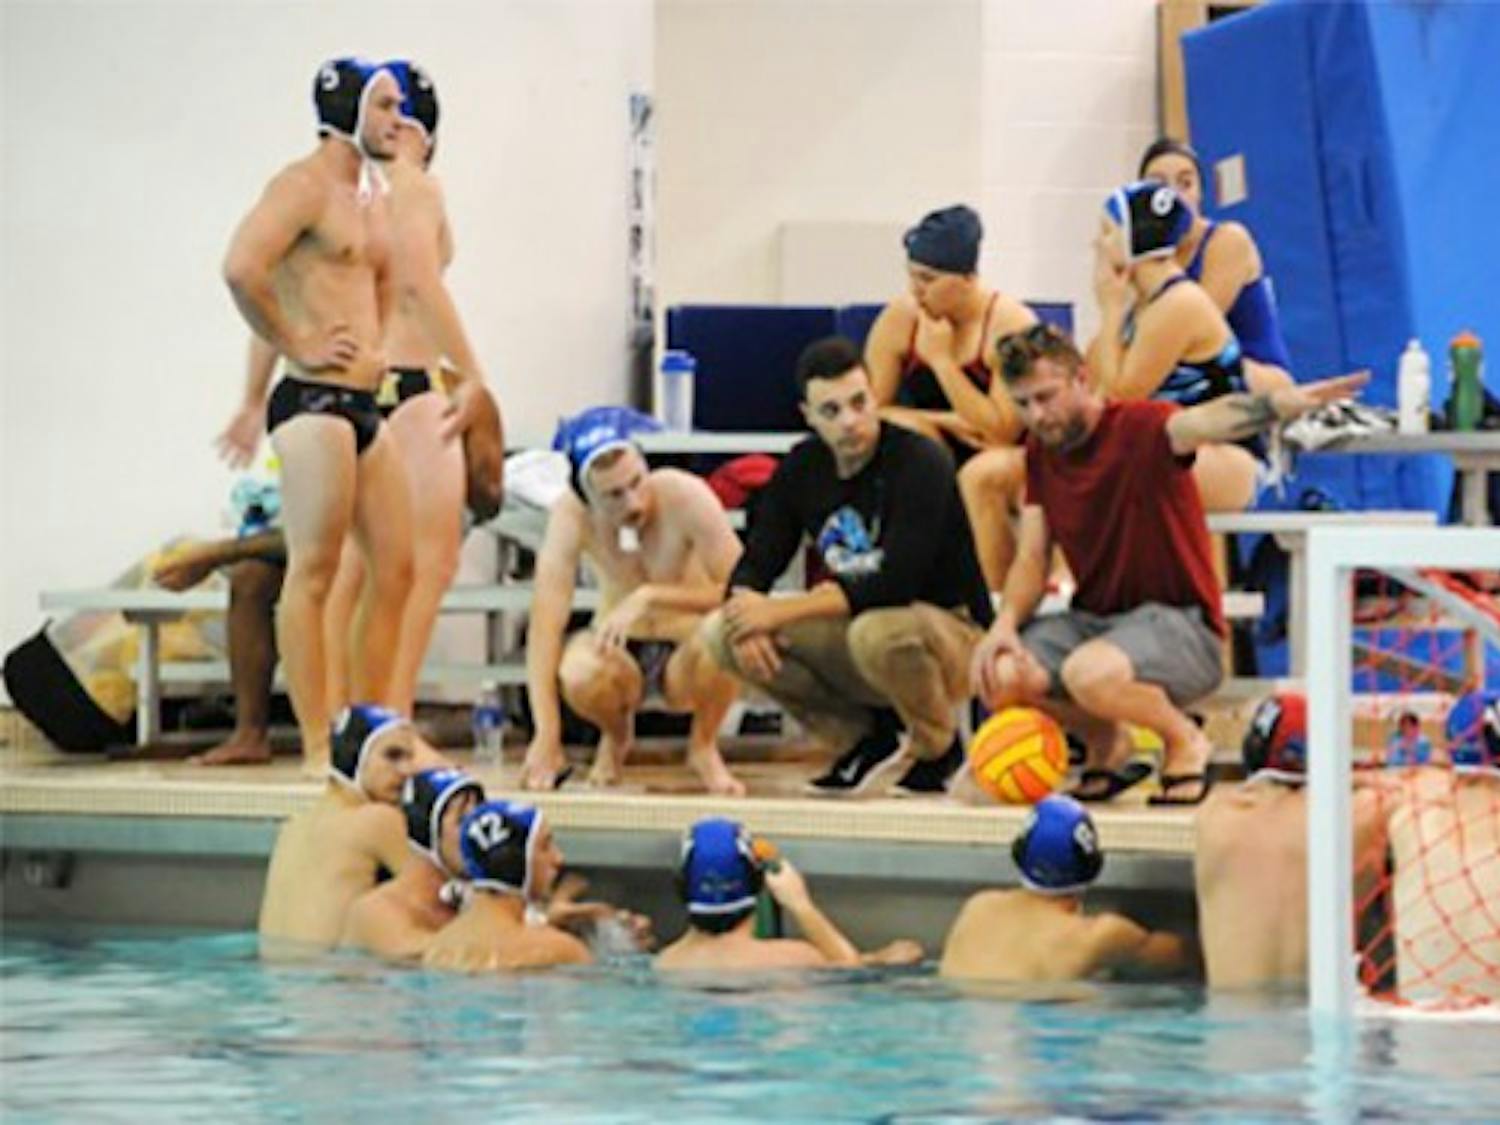 Members of the Buffalo water polo team huddle near the end of the pool in Alumni Arena. The club team is currently in its first season as a part of the Collegiate Water Polo Association.